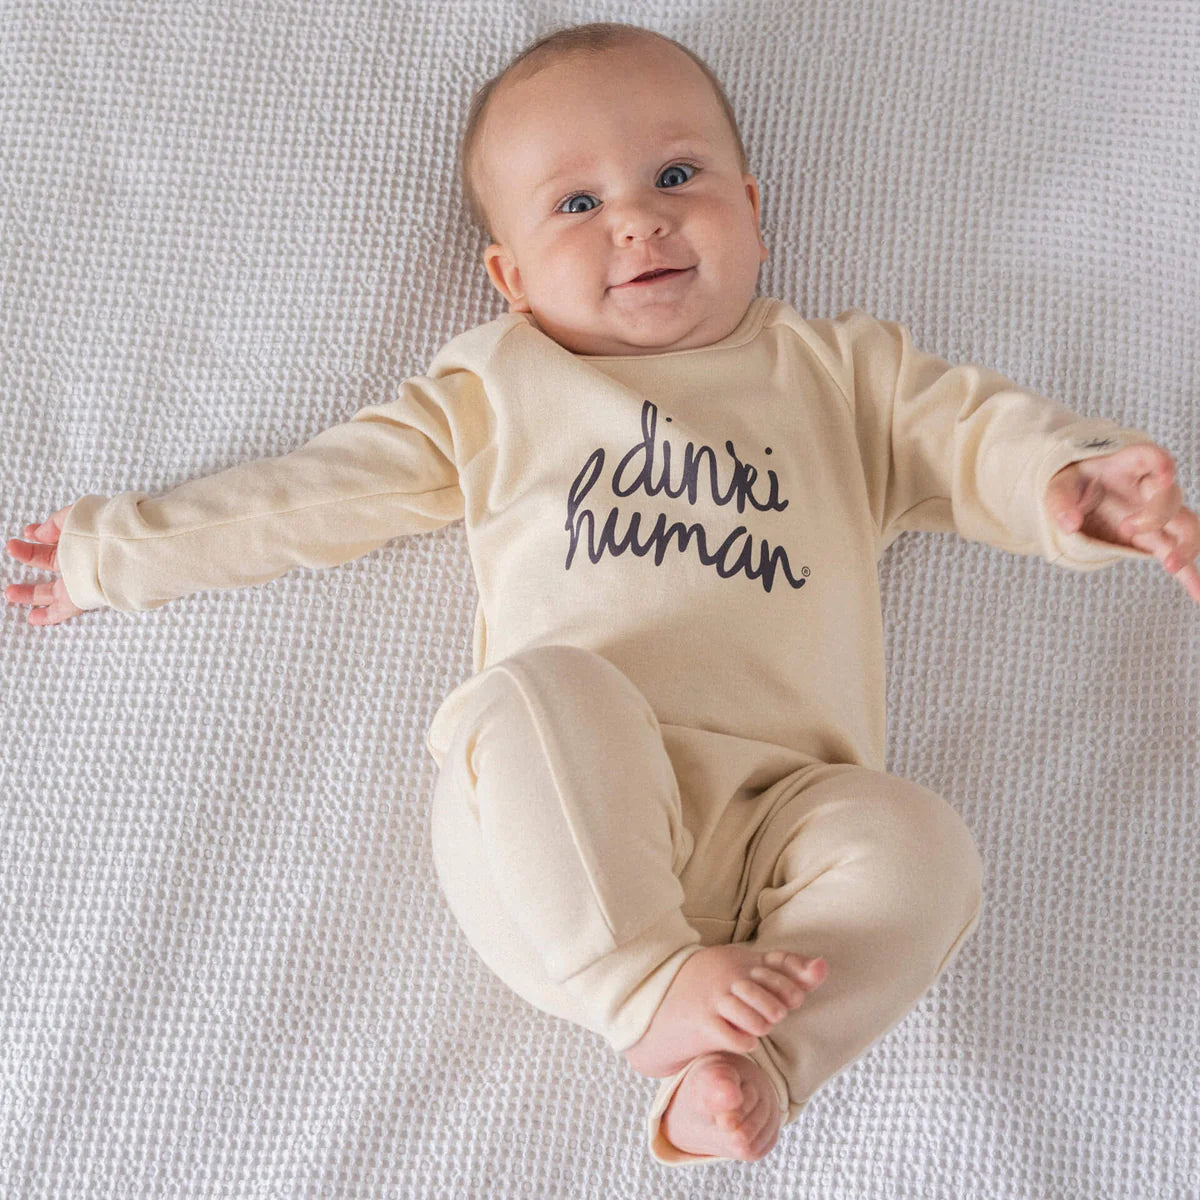 Baby wearing cream footless Babygro with Dinki Human writing on front